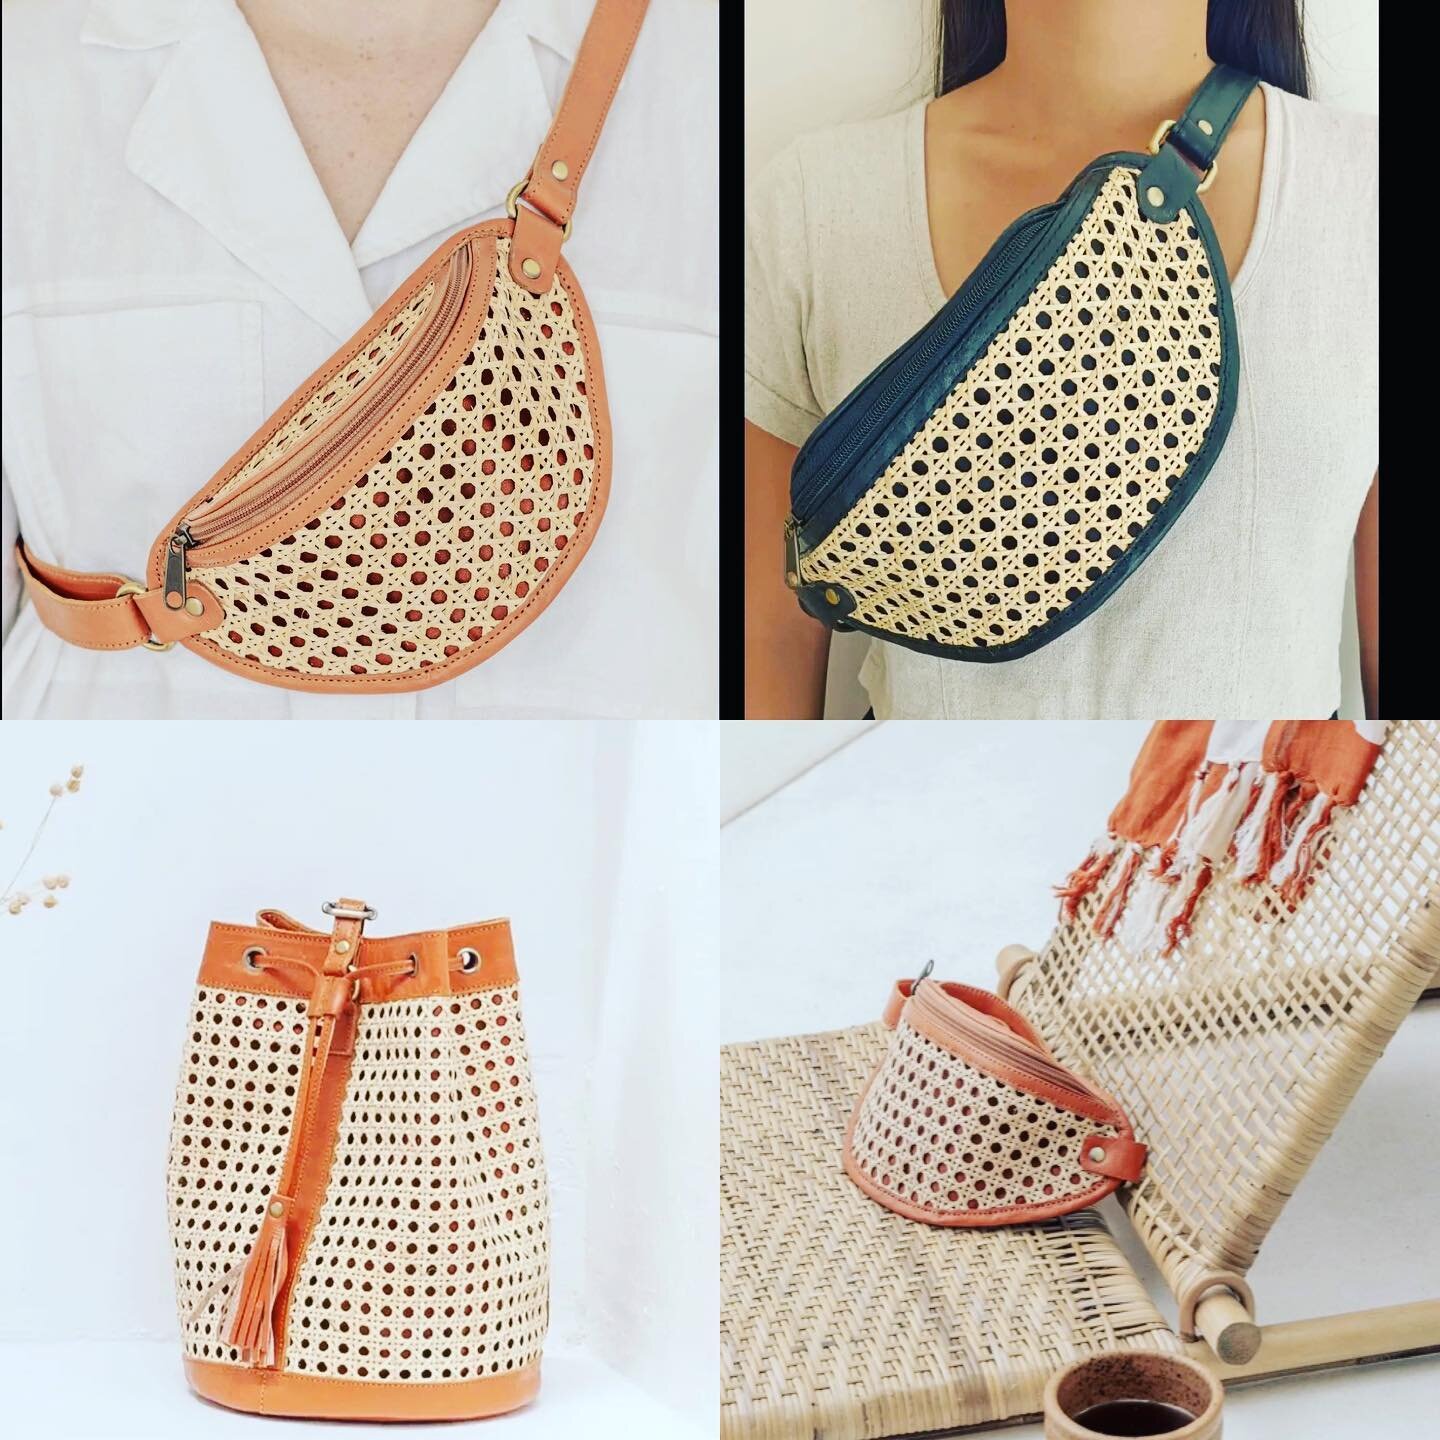 🖤🧡Summer Pre-Sale🖤🧡
We fell in love with these on-trend woven bags and wanted to share the fun!! Want your own??!! Choose from the handmade black or caramel sling belt bags or the roomy cane backpack in caramel. Message us to pre-order!! Placing 